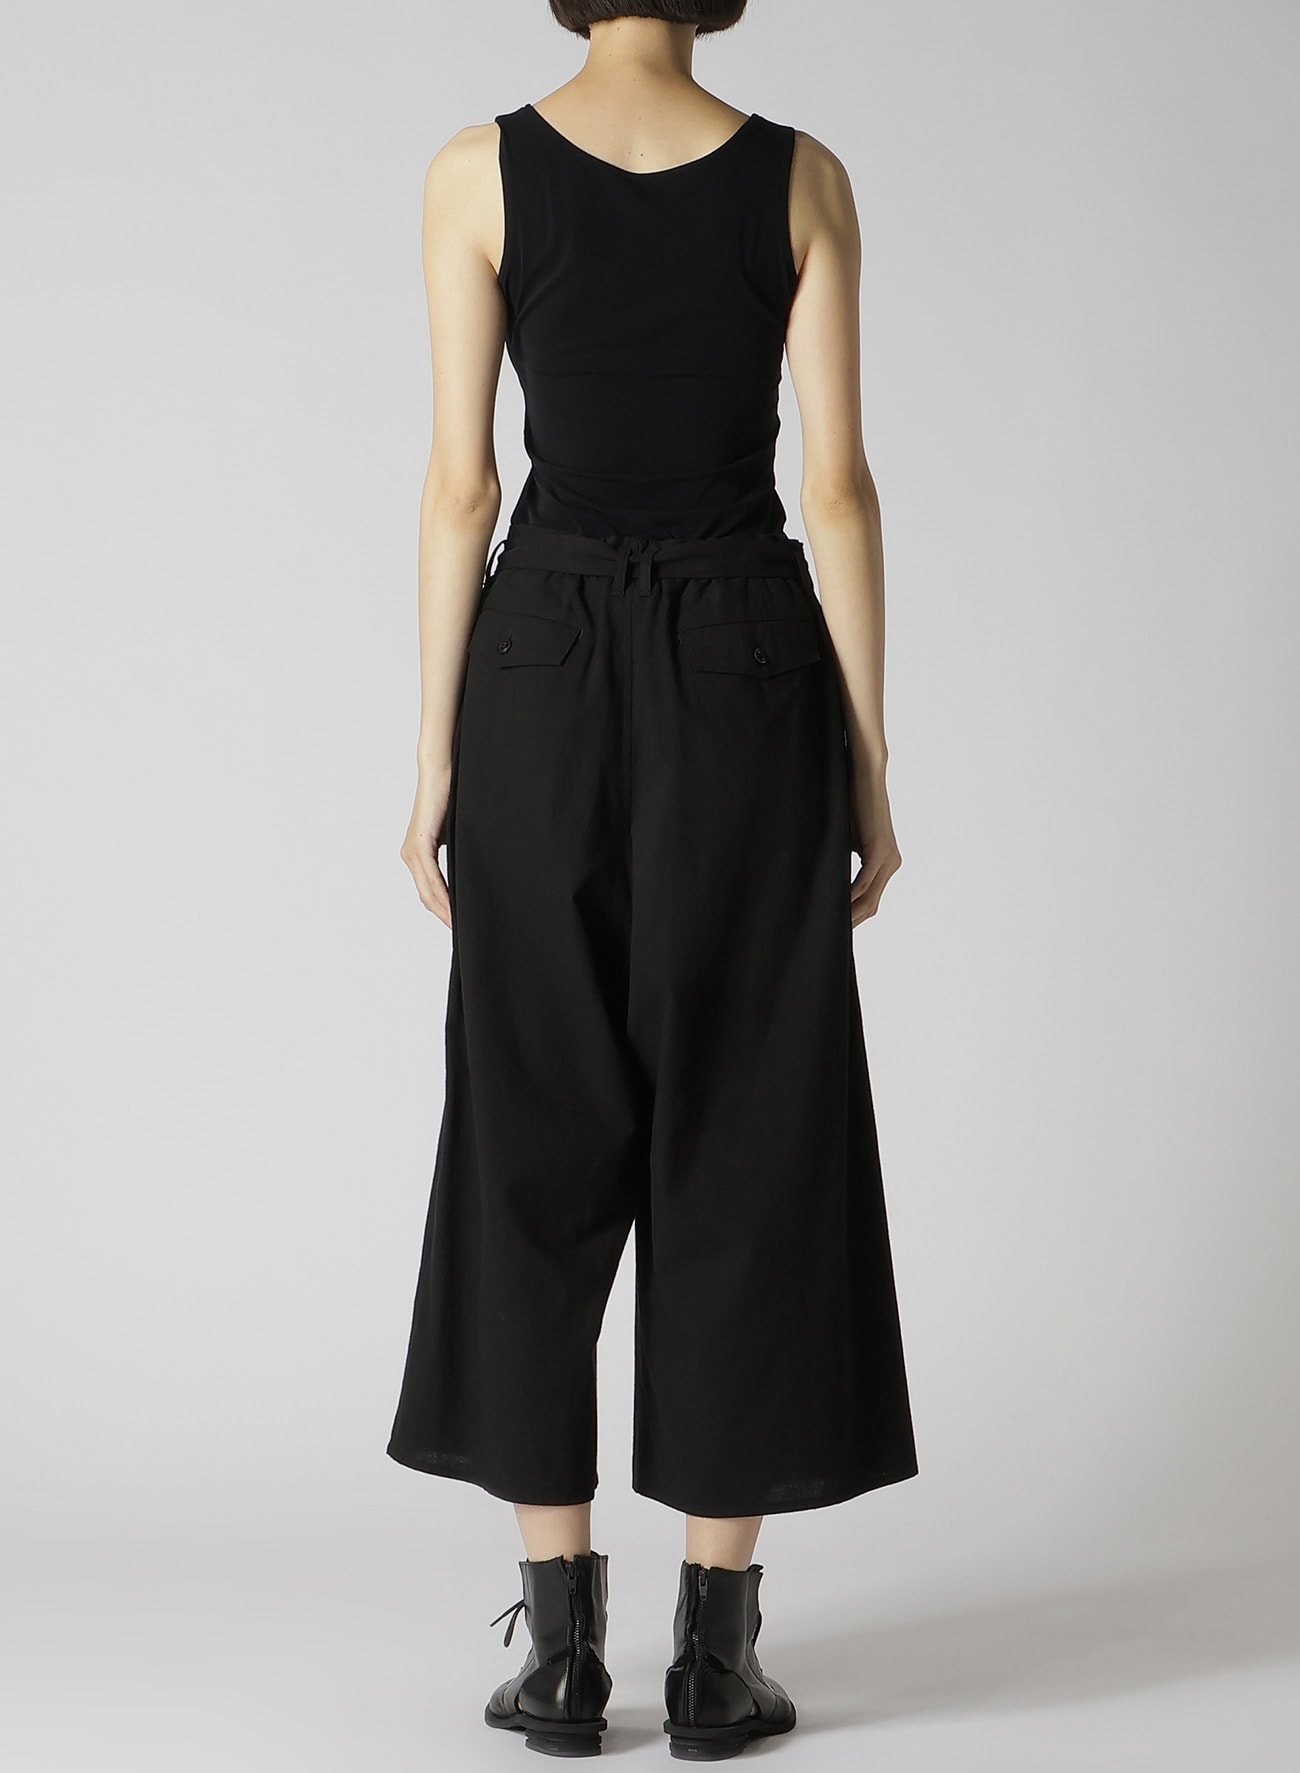 COTTON FLAX POPLIN BELTED PANTS